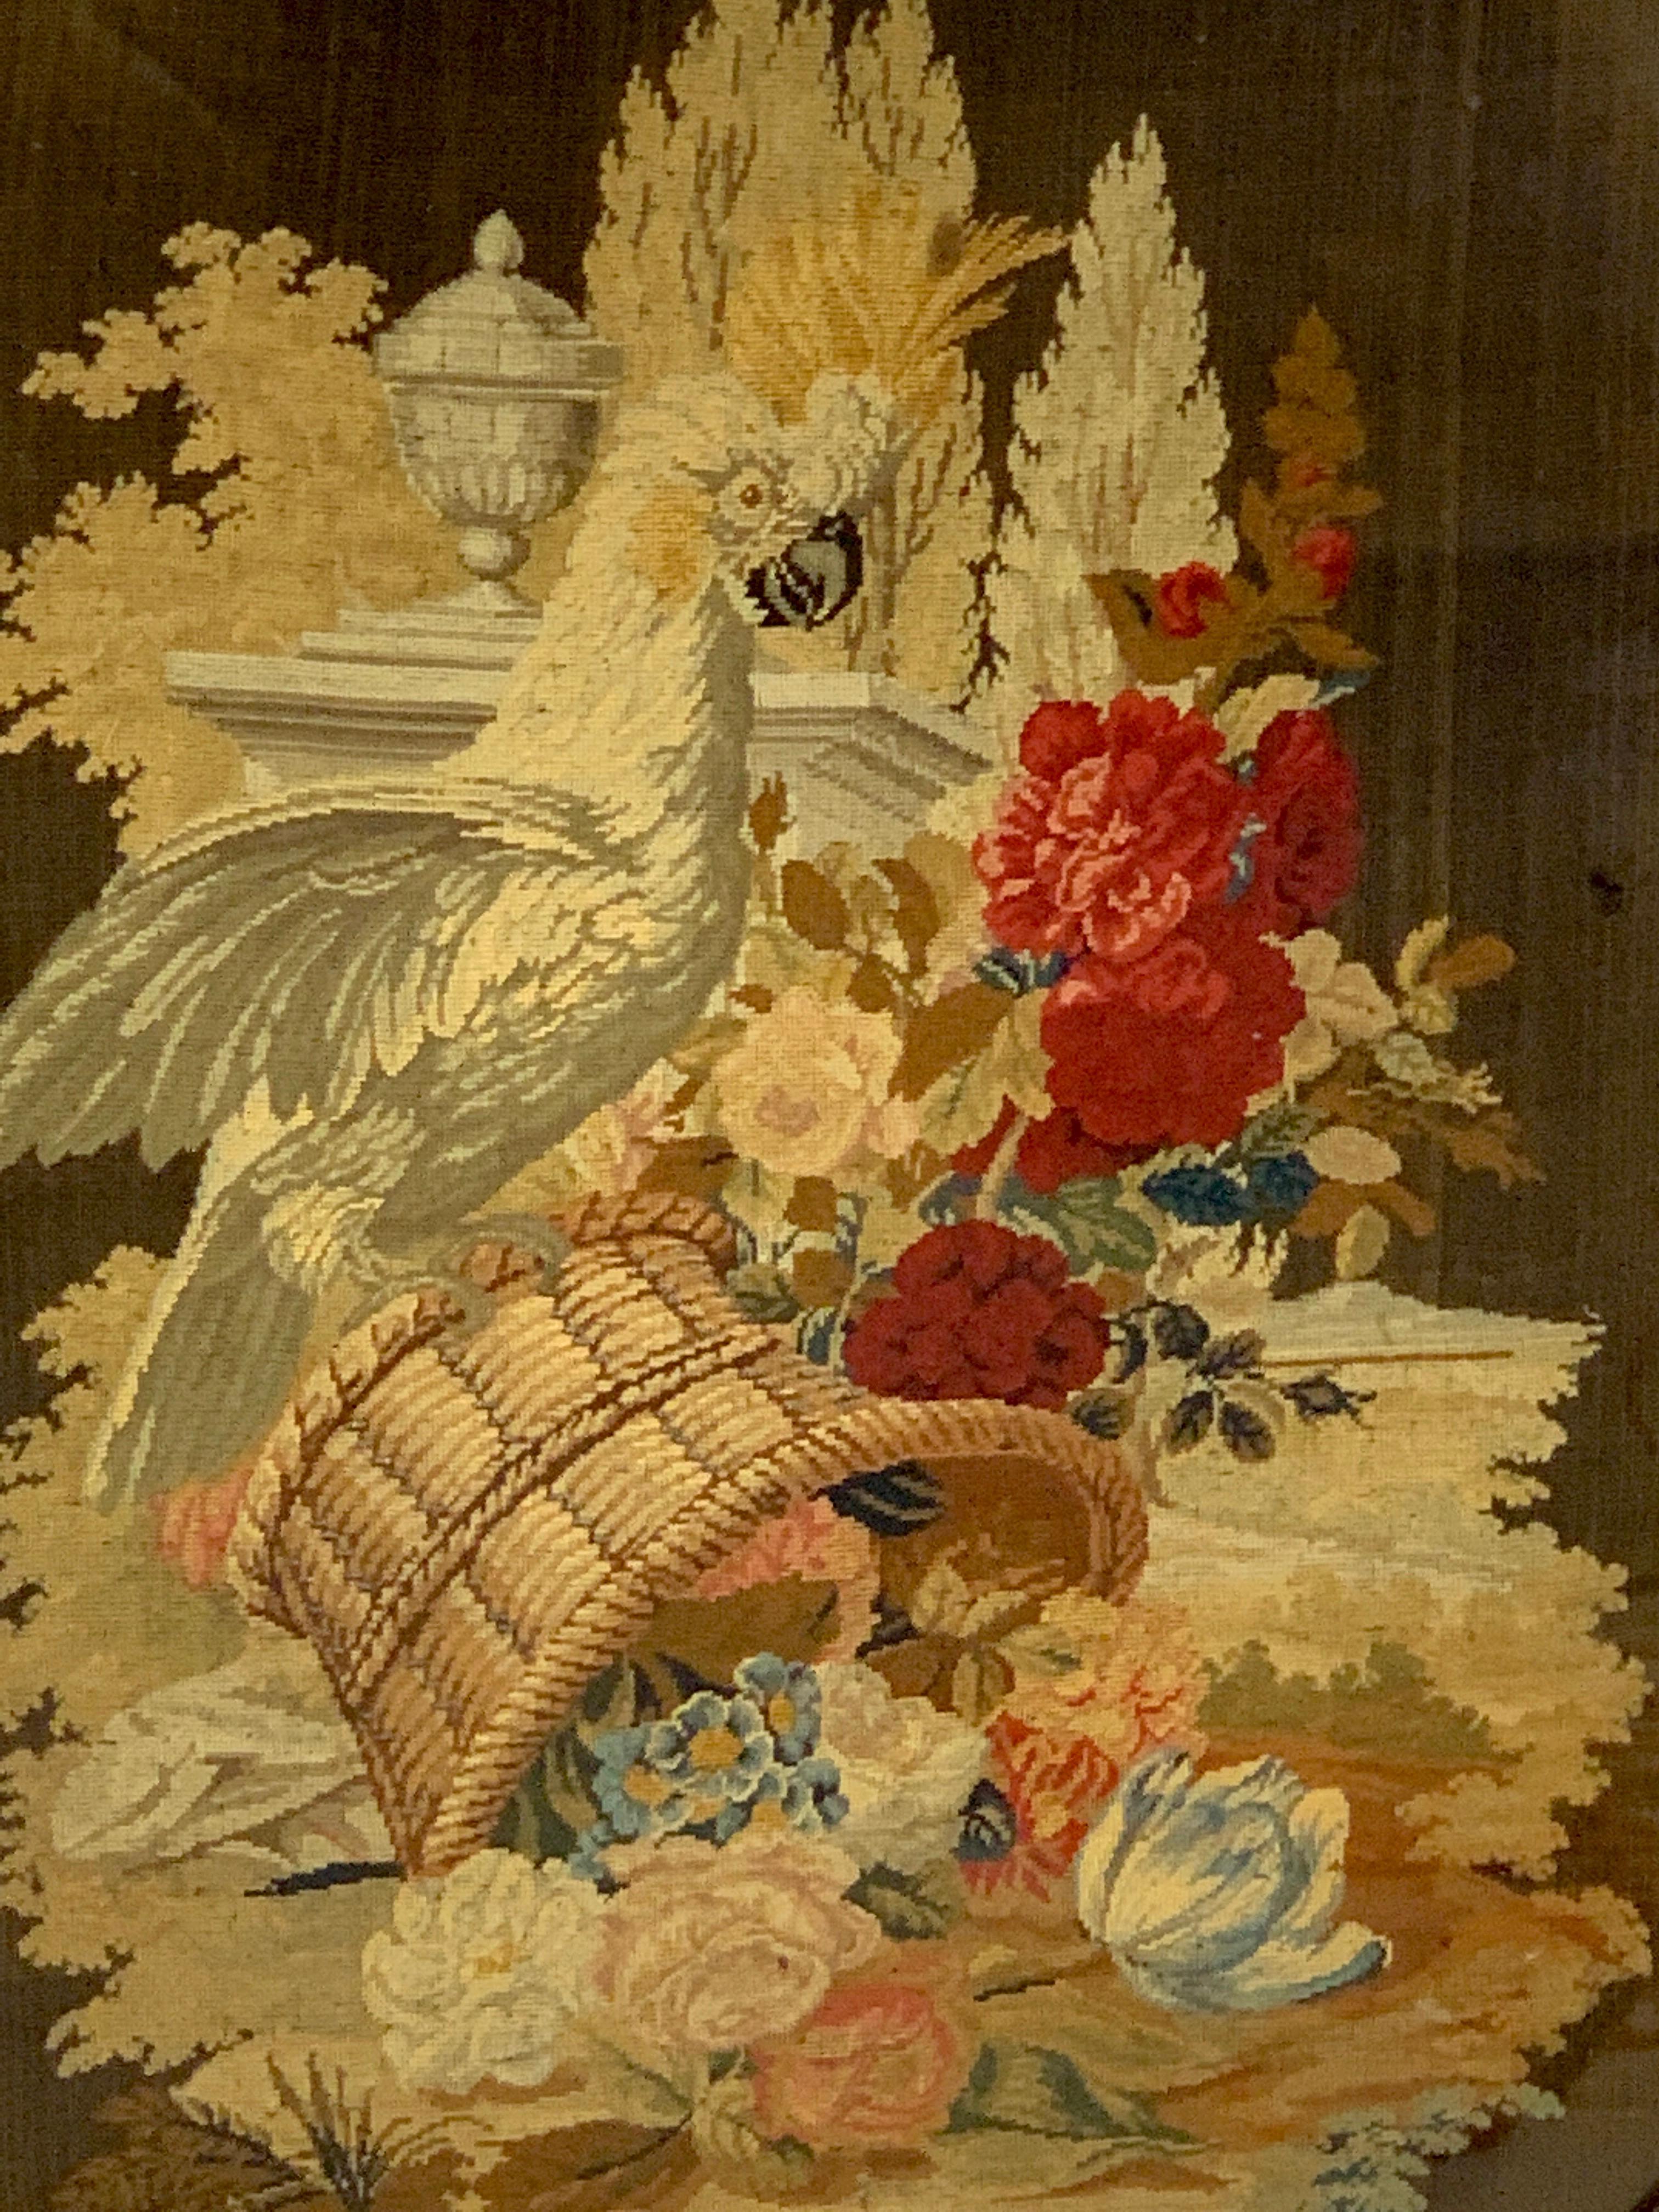 Hand-Carved Exquisite 19th Century Rosewood & Needlepoint Cockatoo in Landscape Firescreen